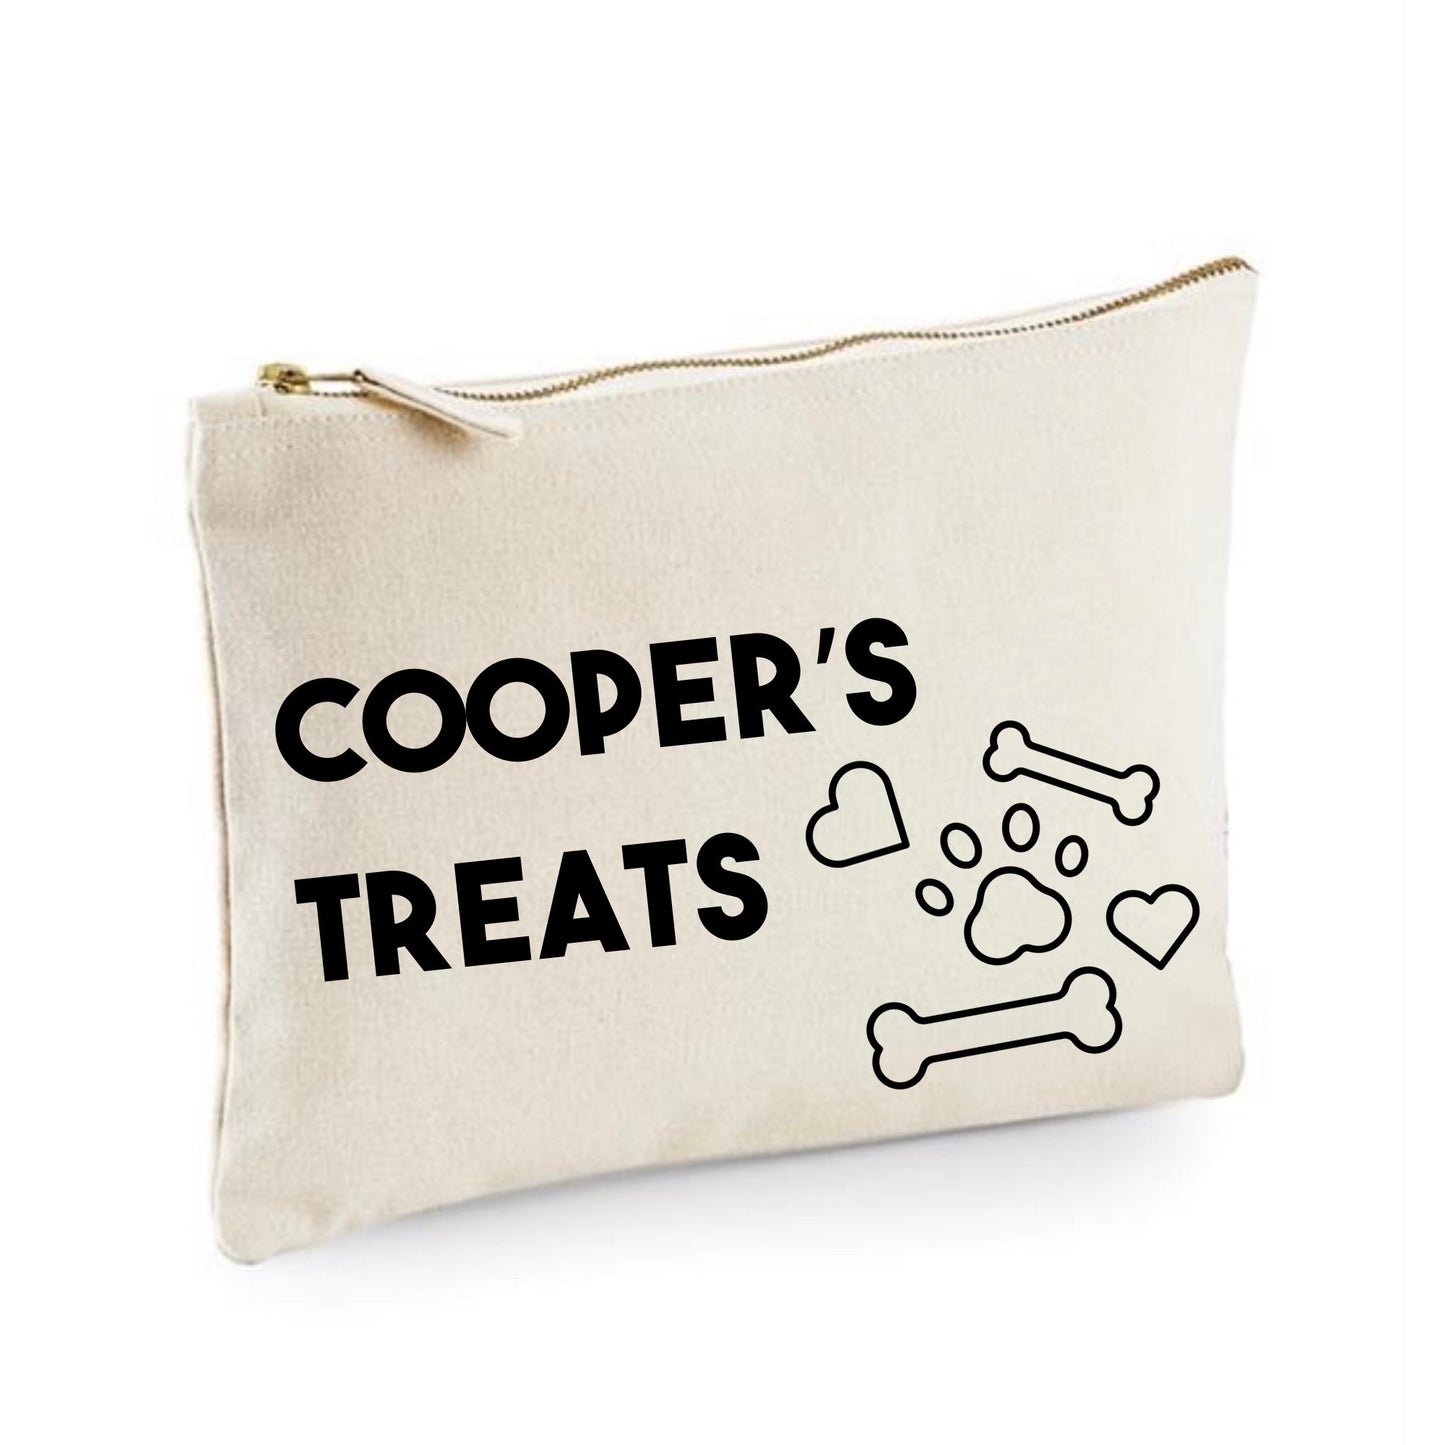 Dog Treat Pouch, Dog Christmas gift, dog dad gift, gift for dog lovers, personalised dog treat bag for on the go